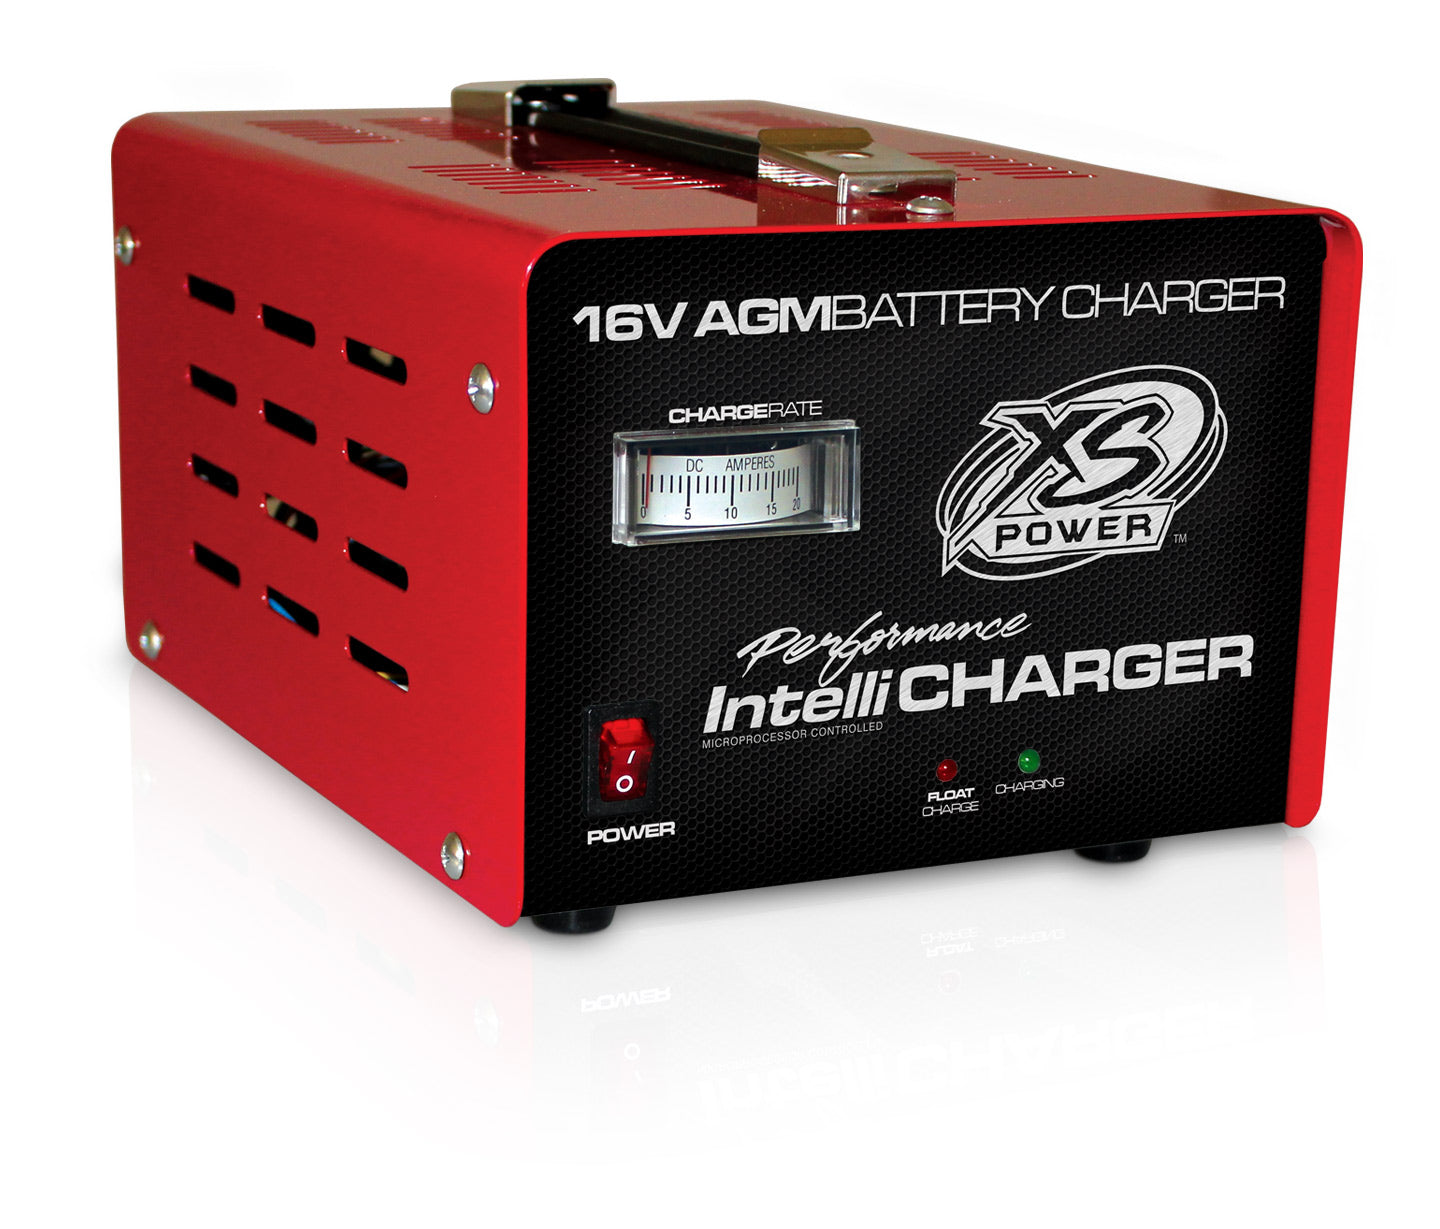 XS Power 1004 16V AGM Vehicle Battery Charger